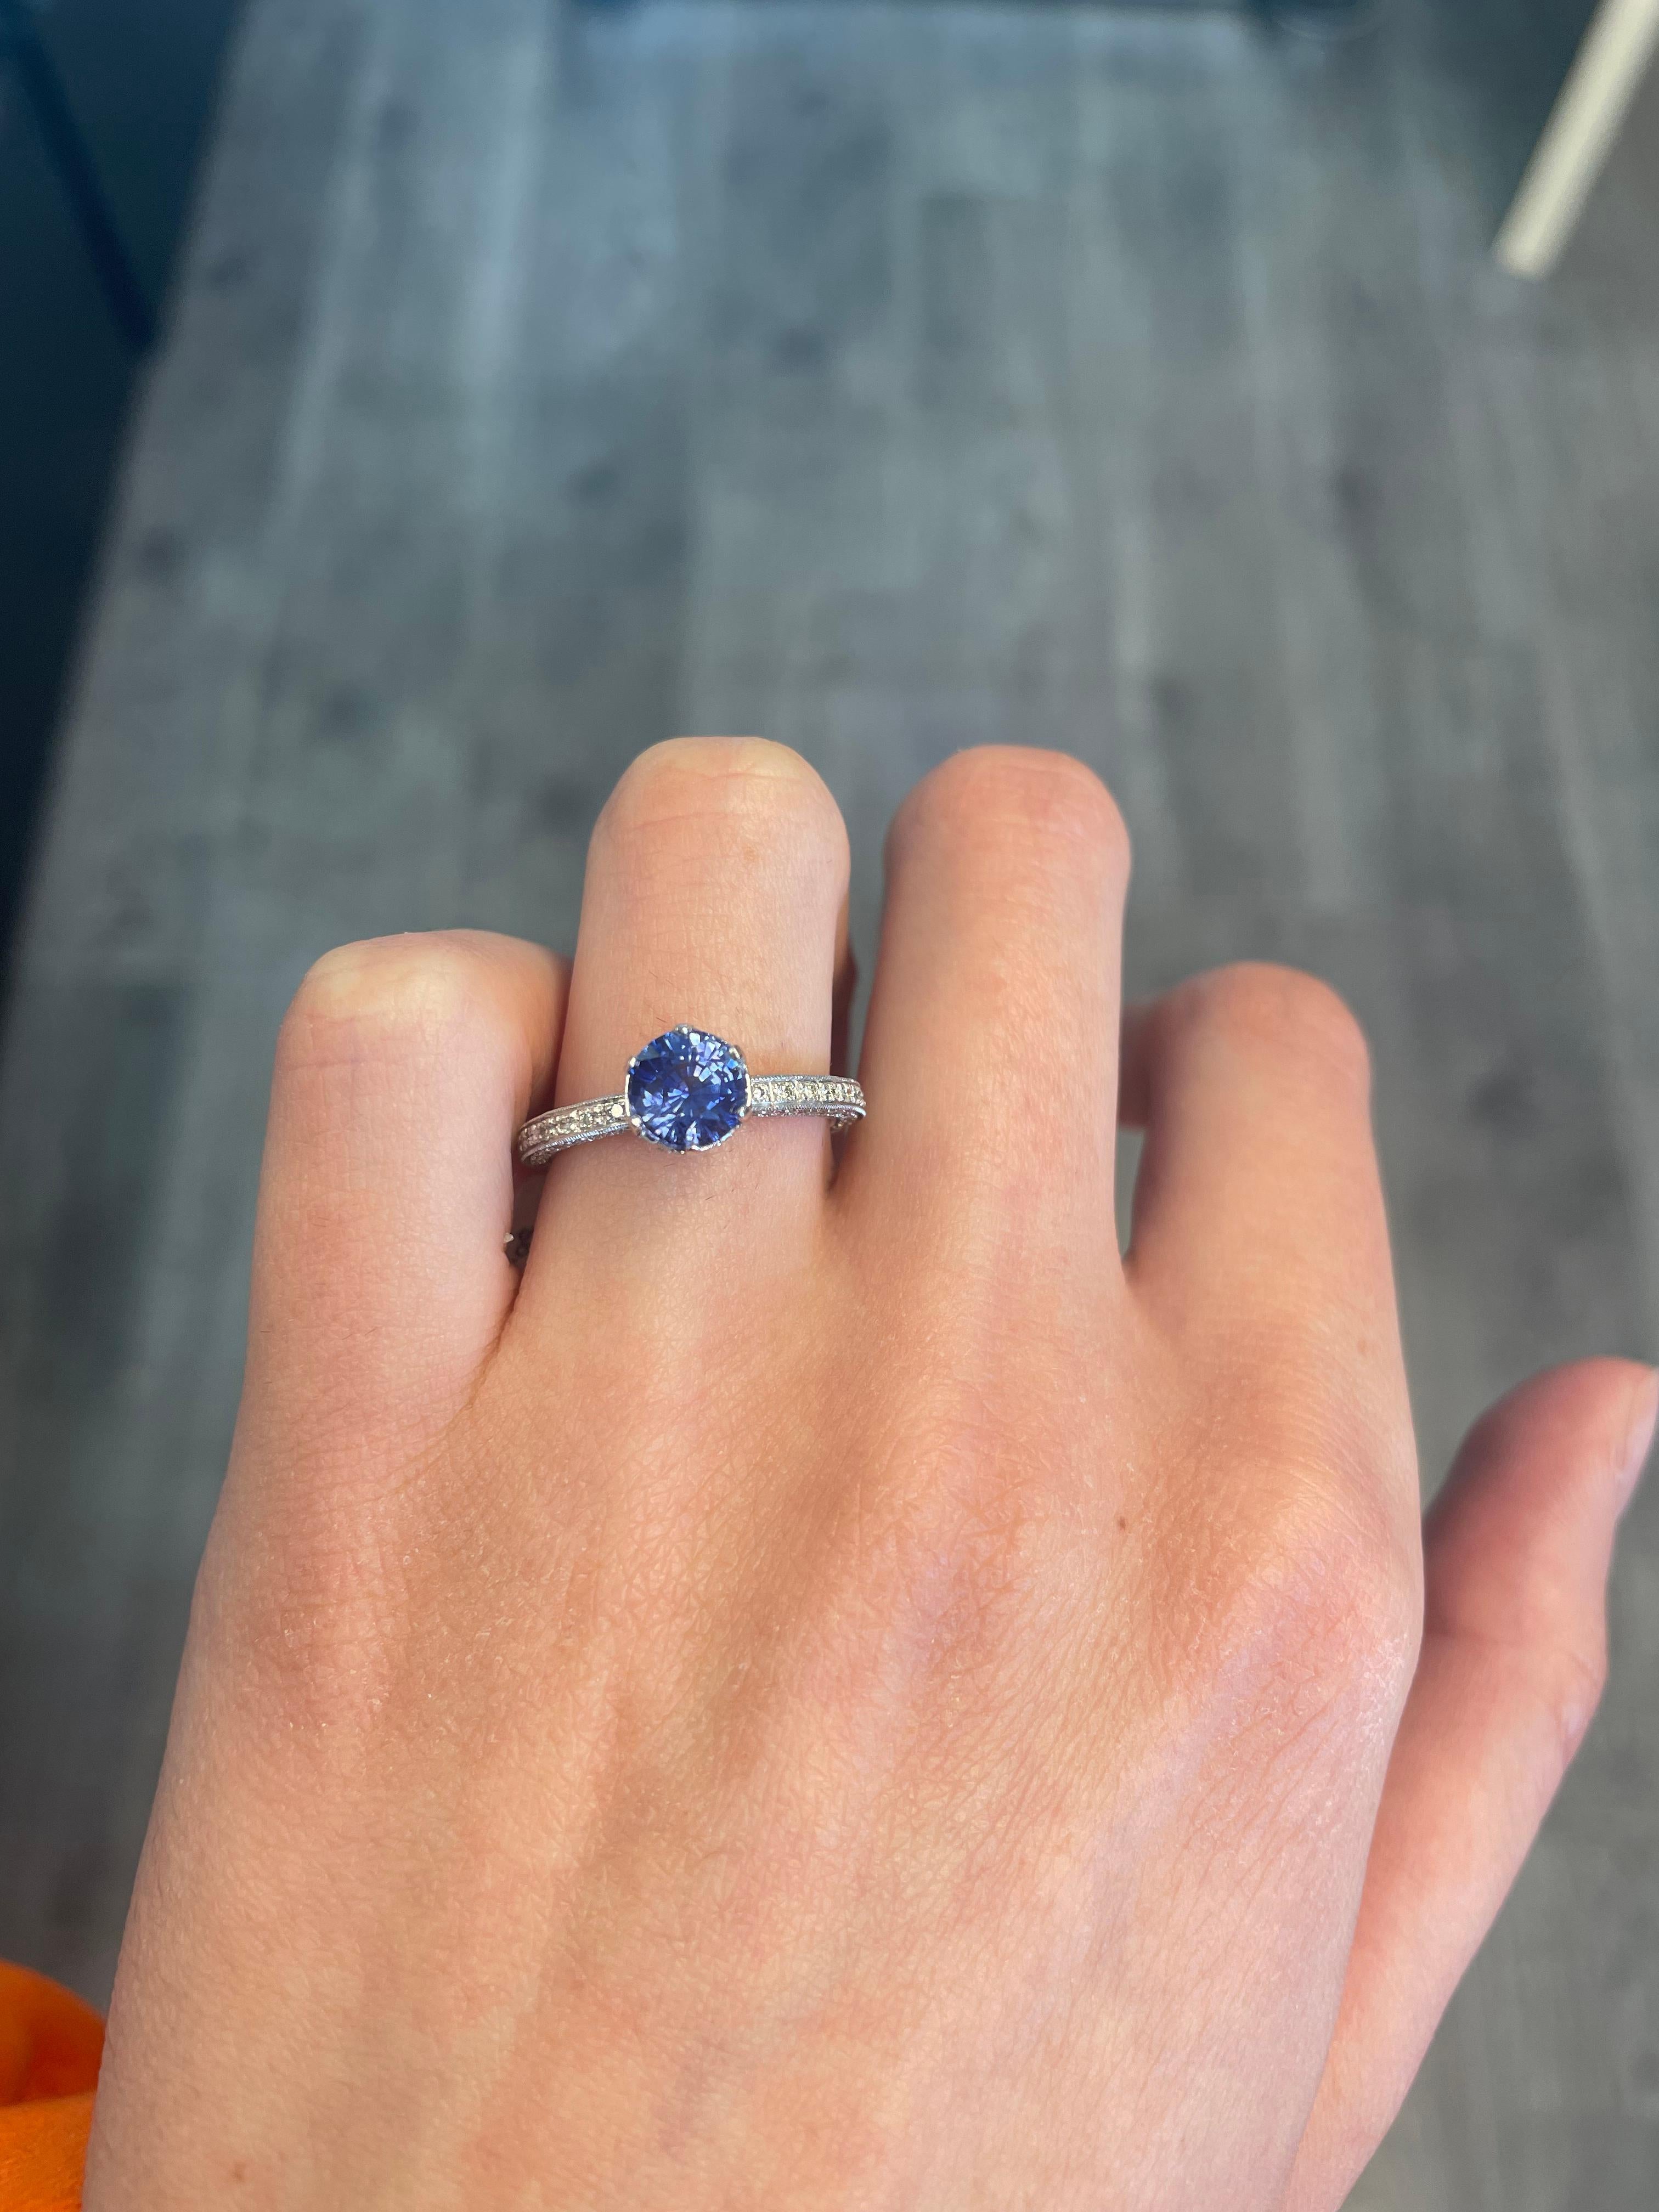 Art Deco style round Ceylon sapphire ring with diamonds.
1.99 carats total gemstone weight.
Center 1.53 carat round Sri Lankan sapphire, heat. Complimented with 0.46 carats of round brilliant diamonds, approximately G/H color and SI clarity. 18k